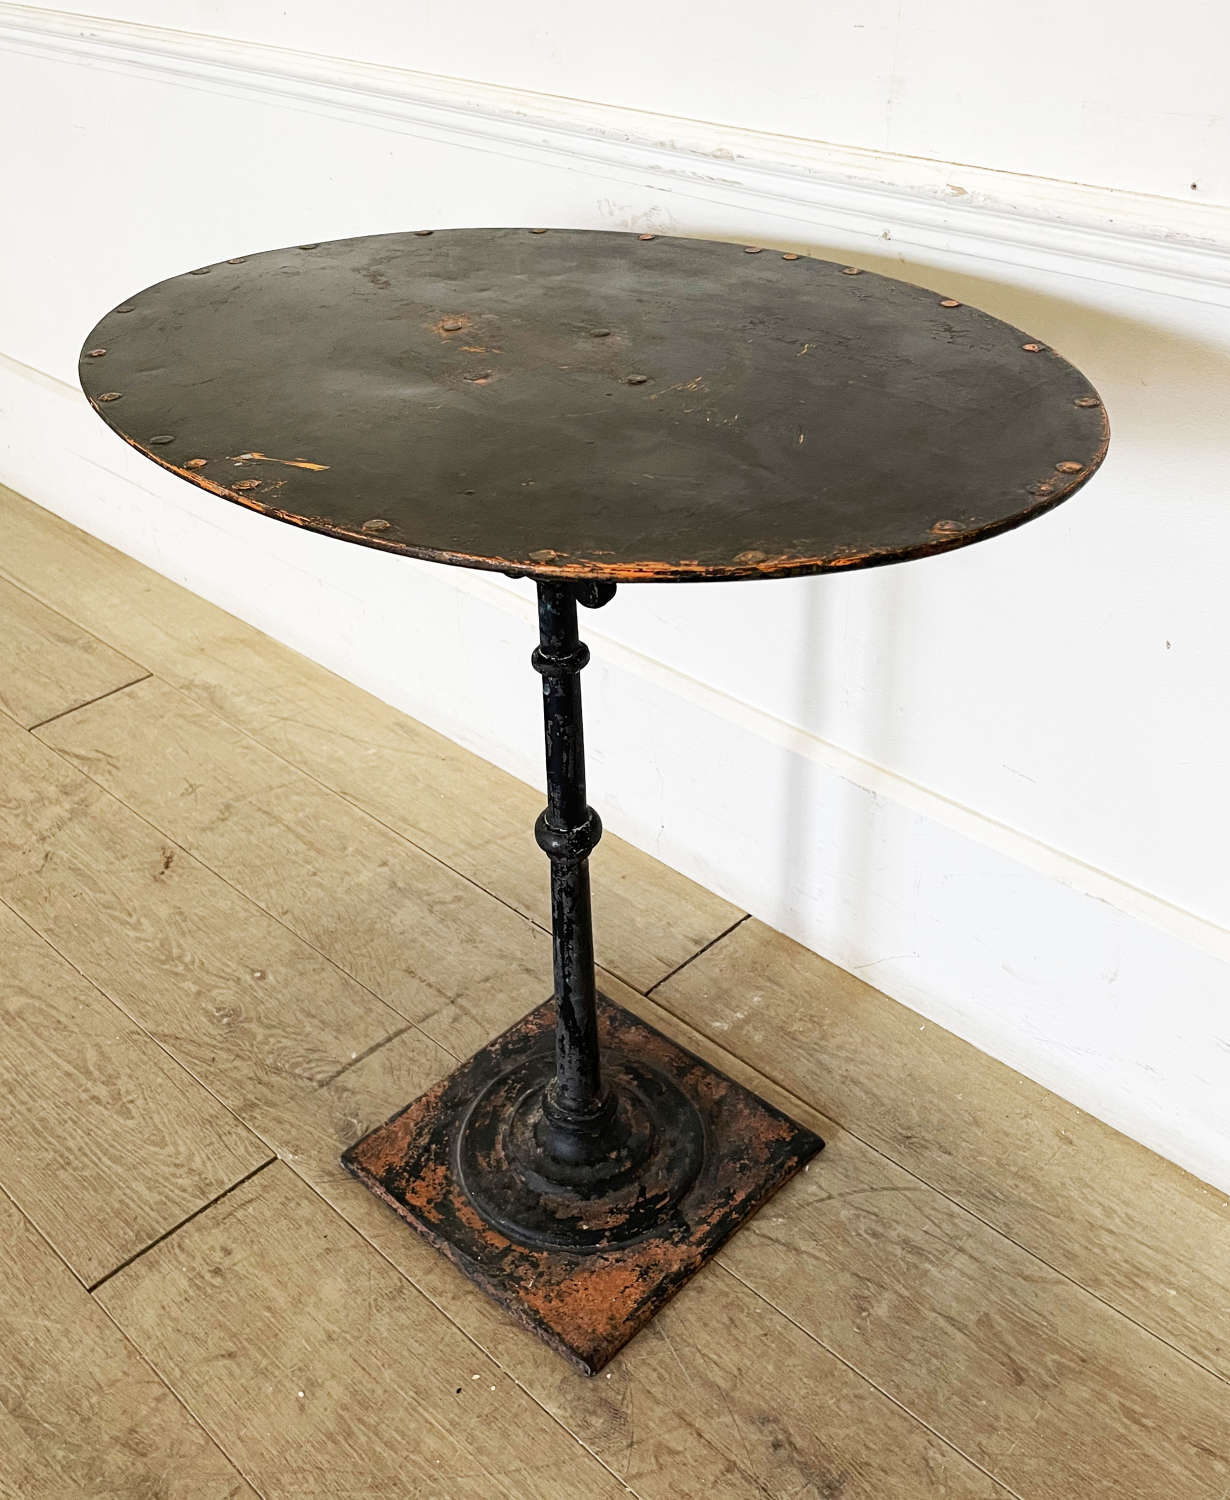 A lovely 19th c French Oval Cast iron Table - circa 1880